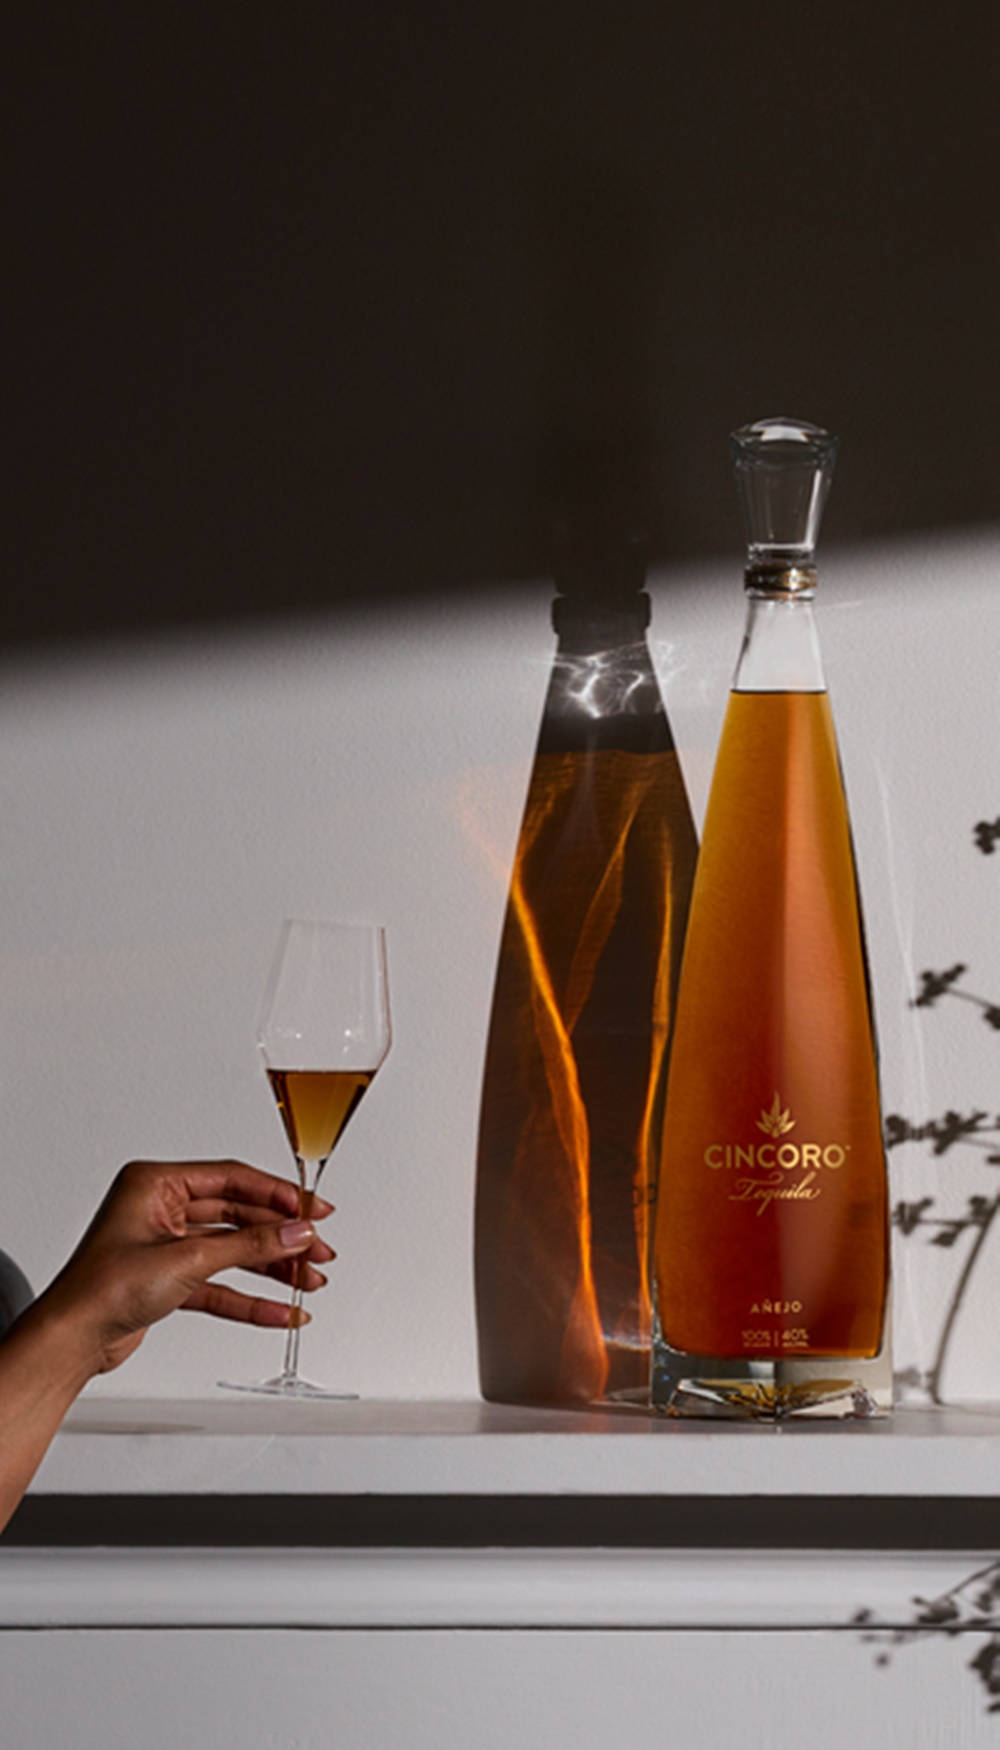 Luxurious Cincoro Anejo Tequila Distilled to Perfection Wallpaper